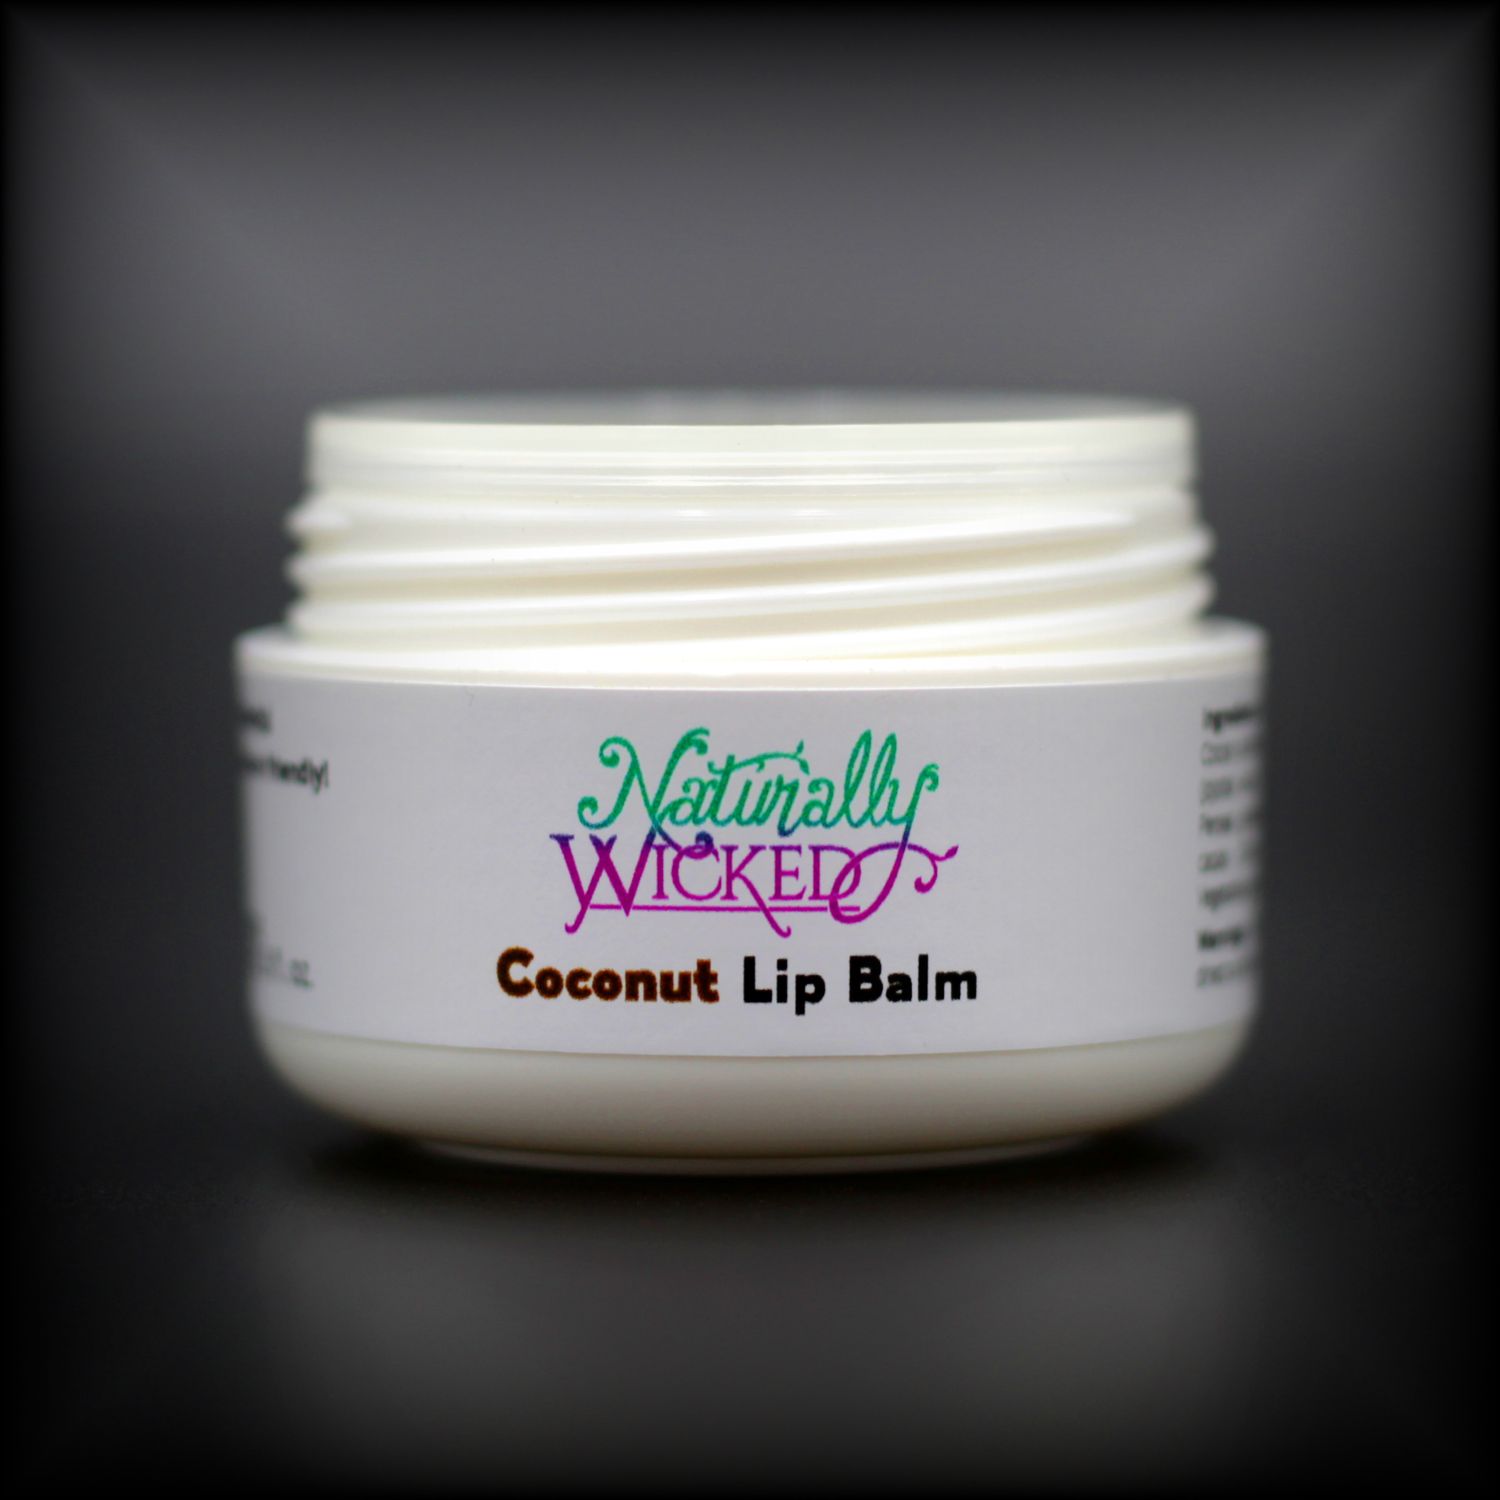 Naturally Wicked Coconut Lip Balm Container Without Lid, Exposing Screwed Lid Connection & Seal